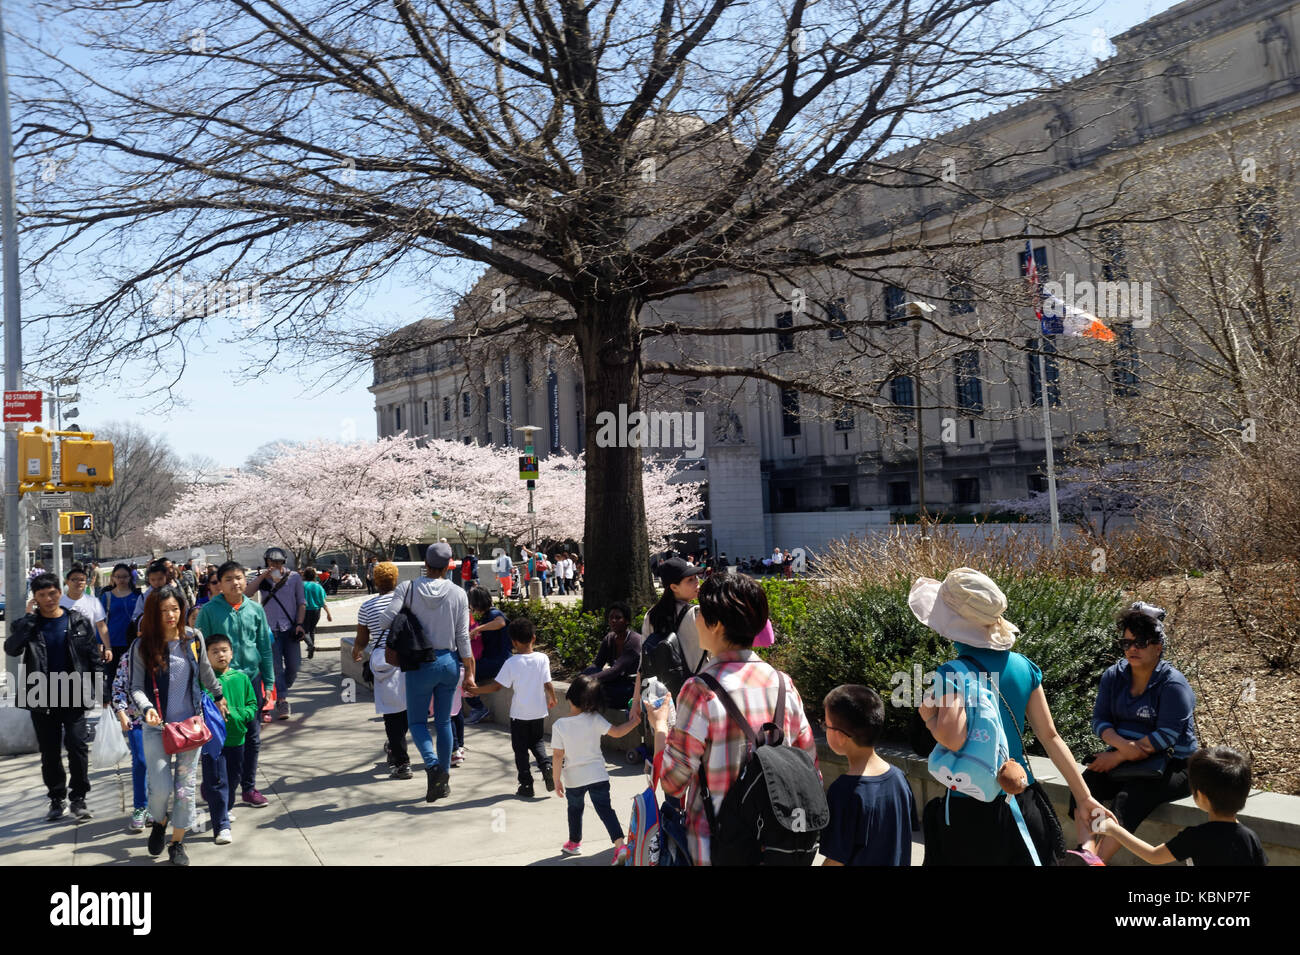 visitors and tourists arriving at the Brooklyn Museum of Art on a warm Spring day with cherry blossom trees in full bloom. Stock Photo